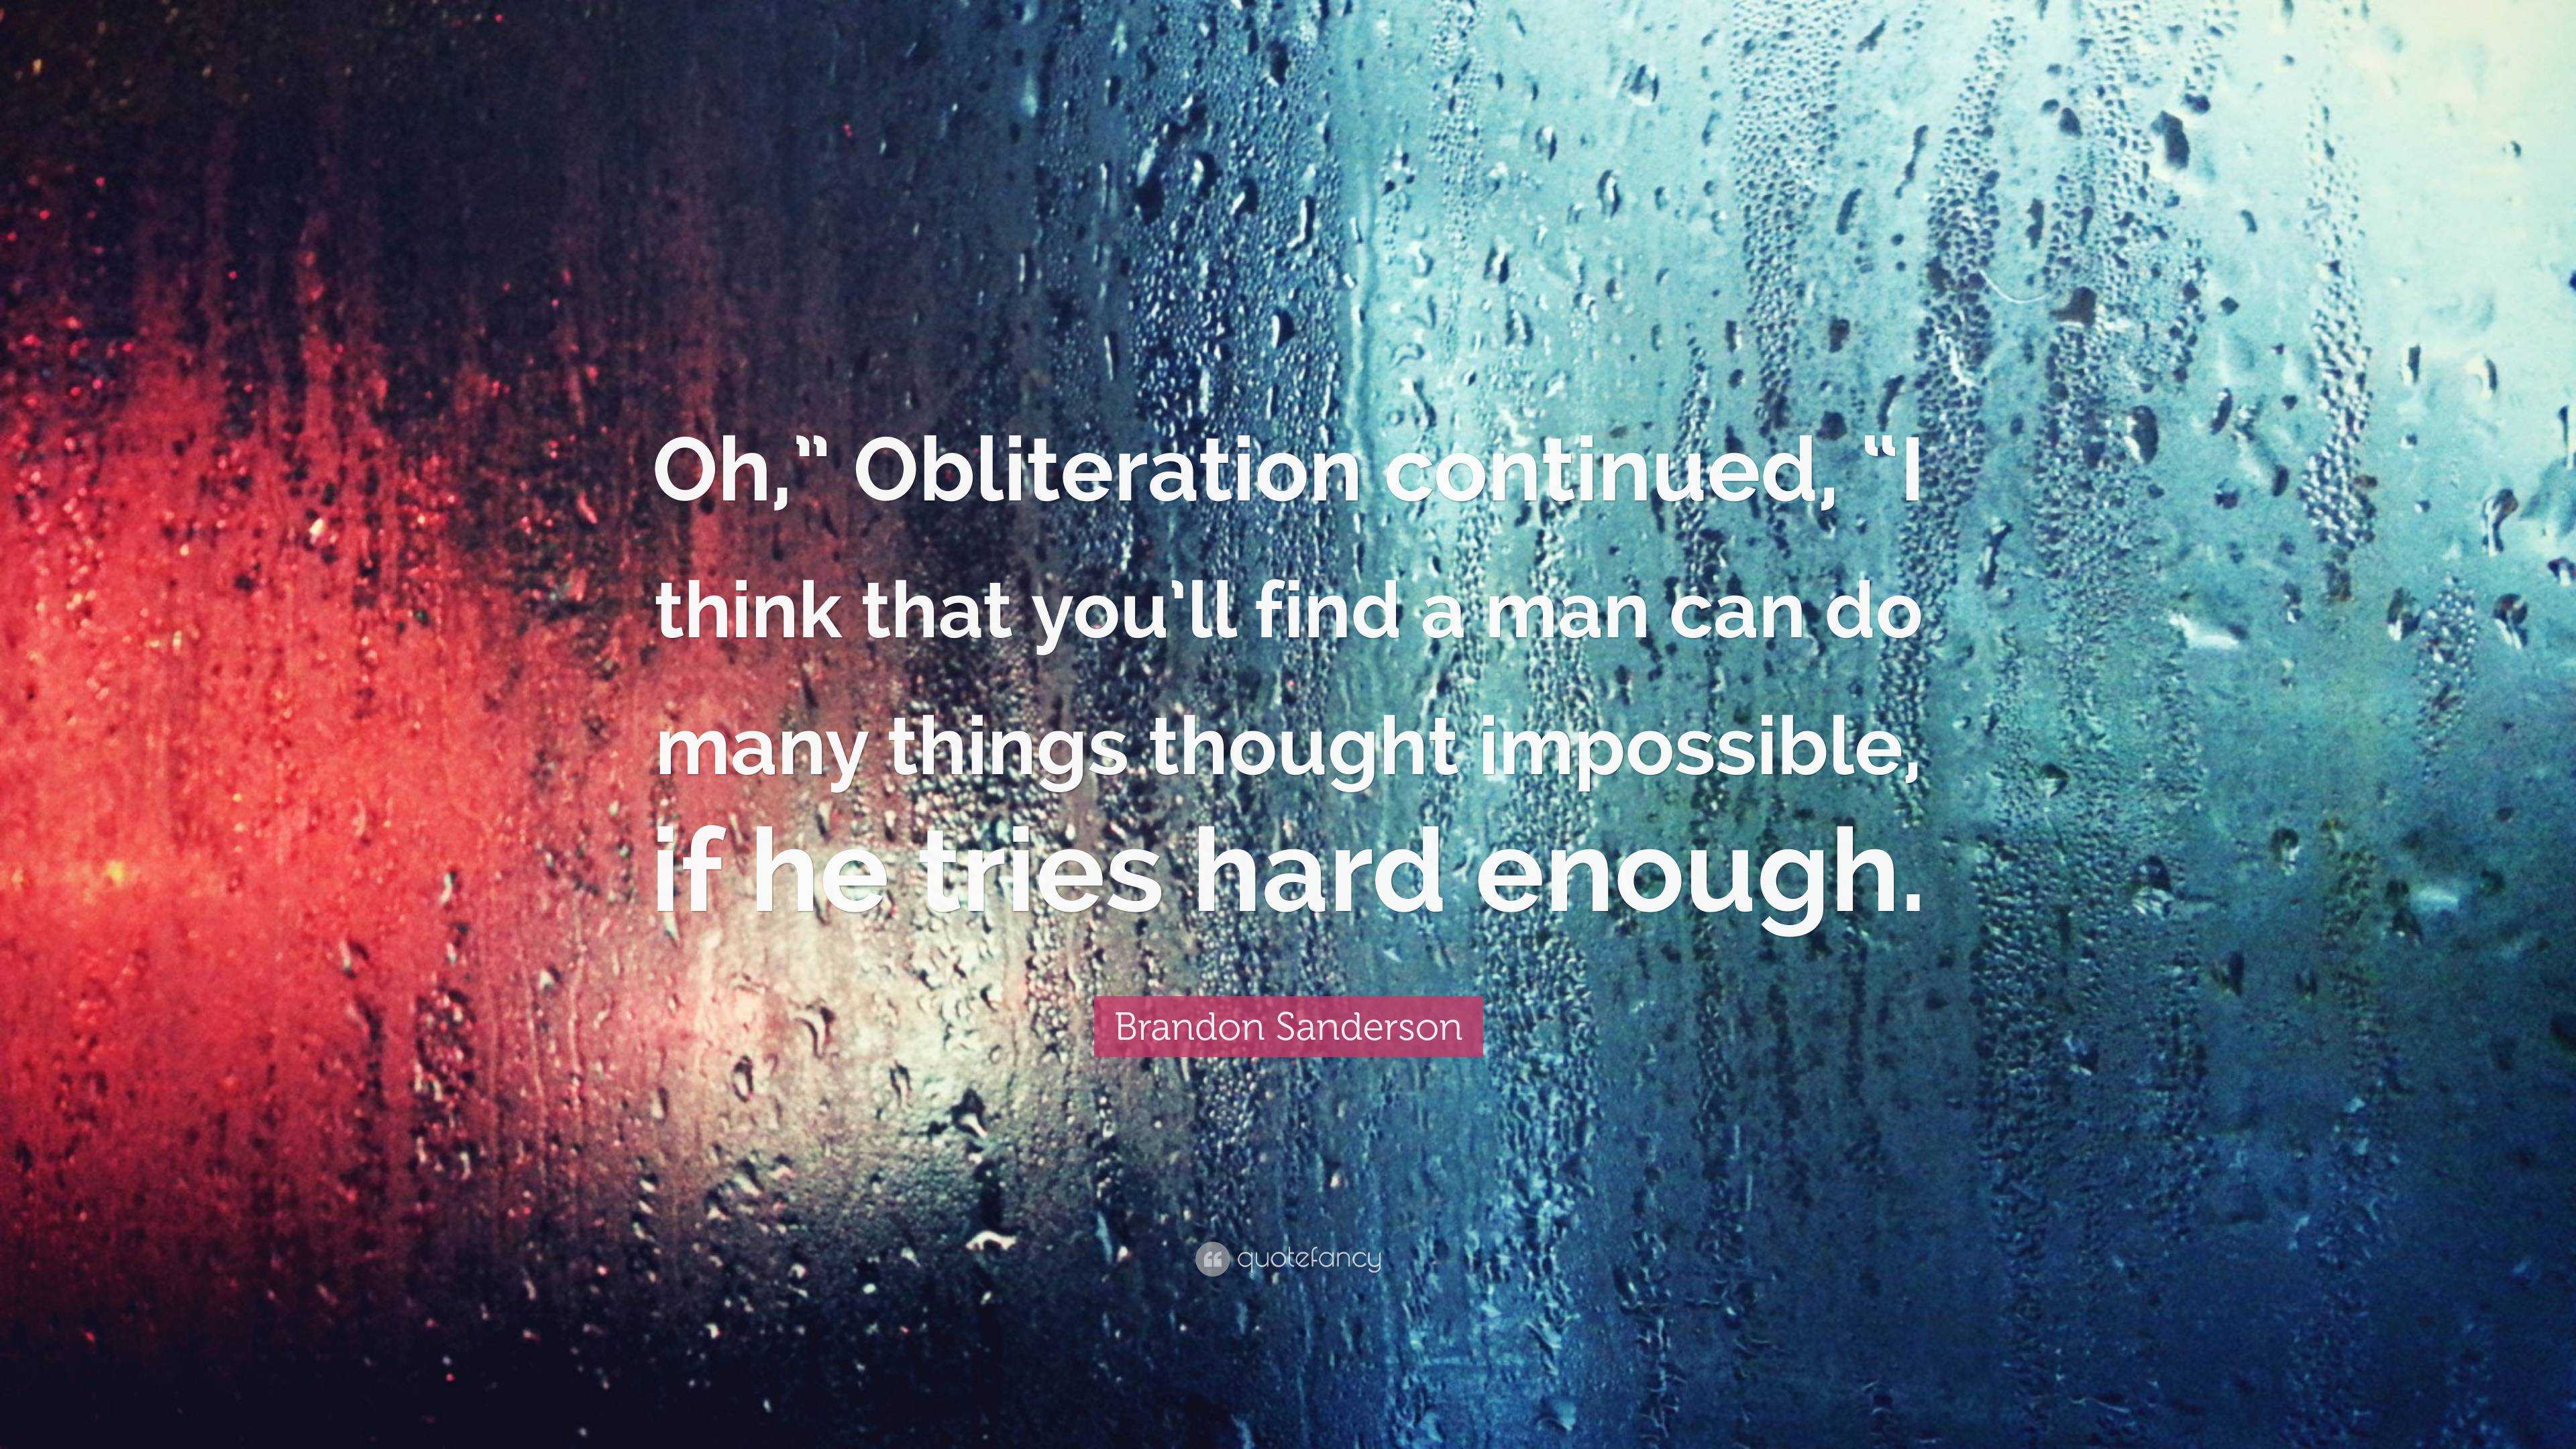 https://quotefancy.com/media/wallpaper/3840x2160/6706822-Brandon-Sanderson-Quote-Oh-Obliteration-continued-I-think-that-you.jpg